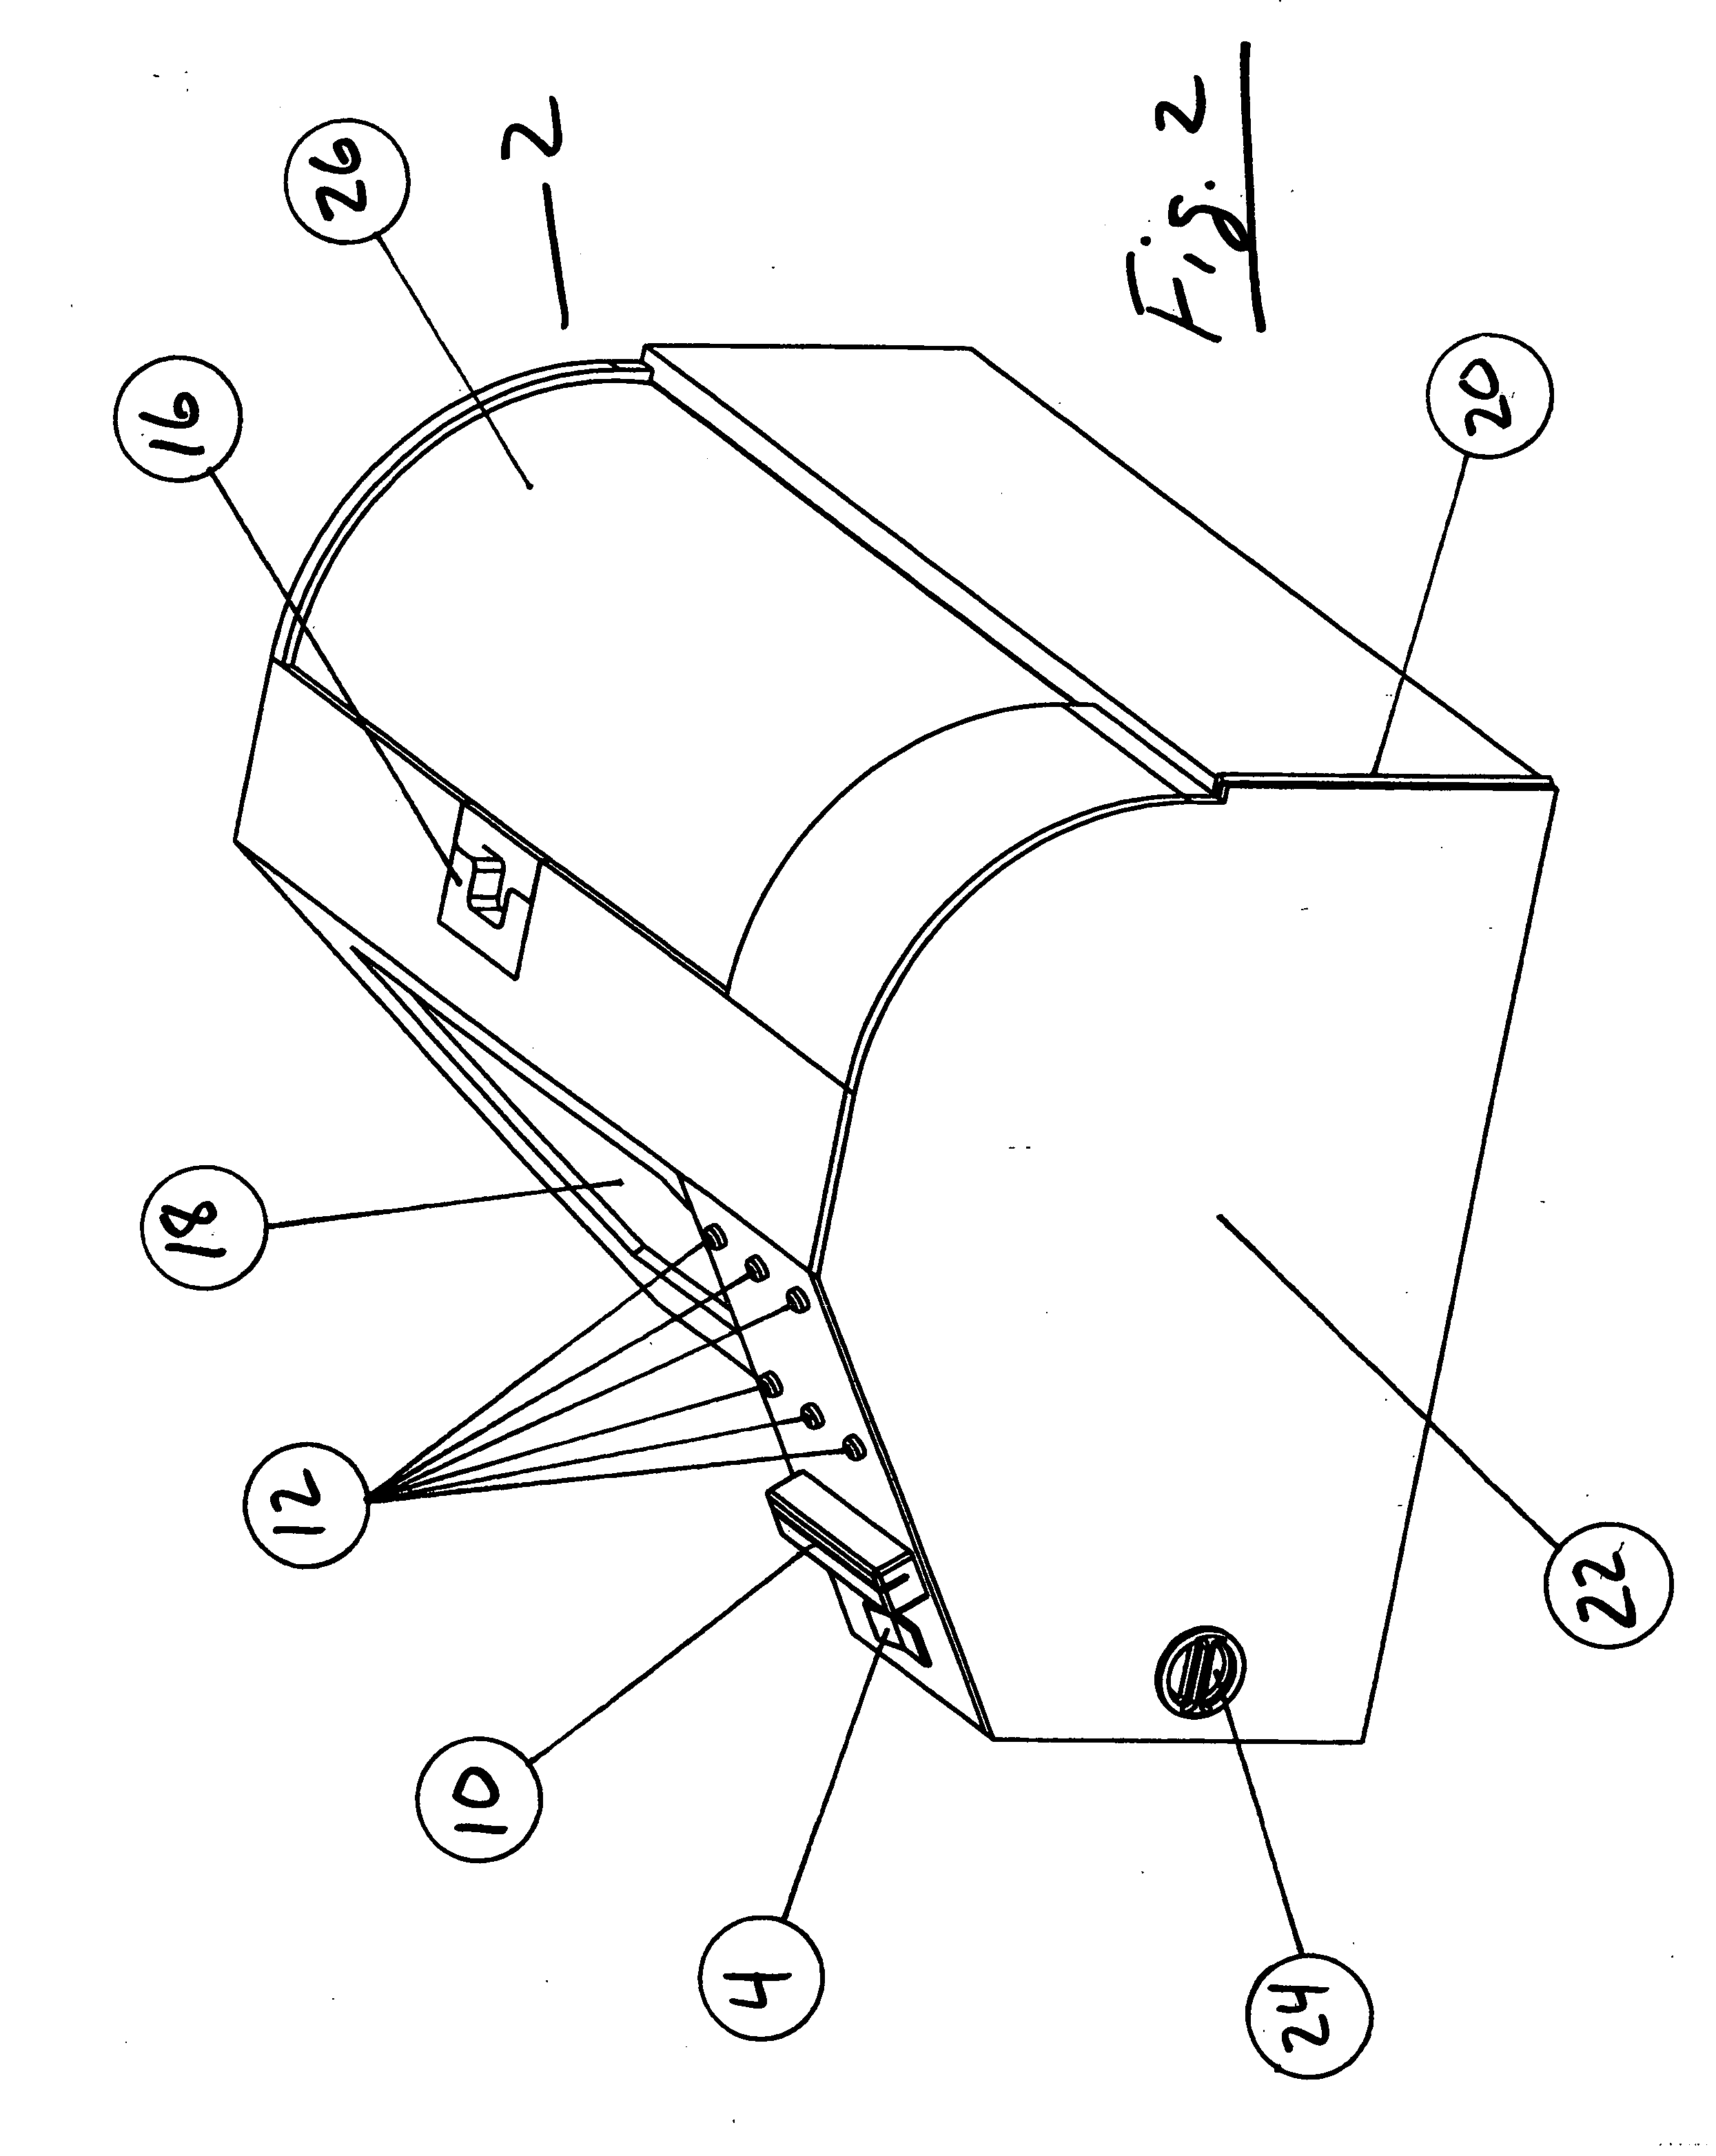 Apparatus for coating medical devices